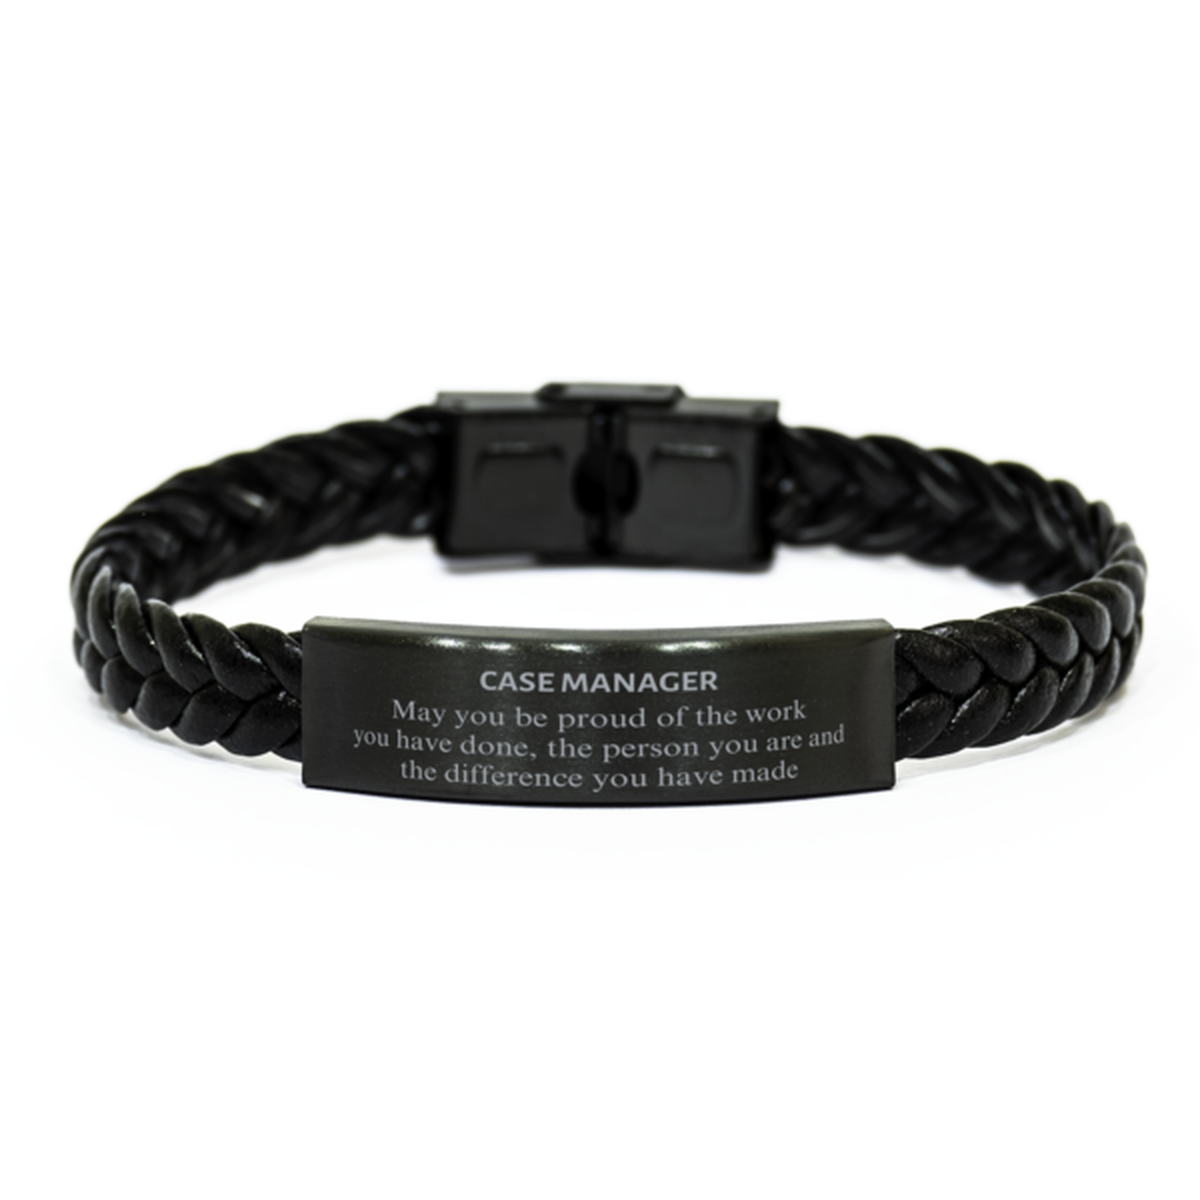 Case Manager May you be proud of the work you have done, Retirement Case Manager Braided Leather Bracelet for Colleague Appreciation Gifts Amazing for Case Manager